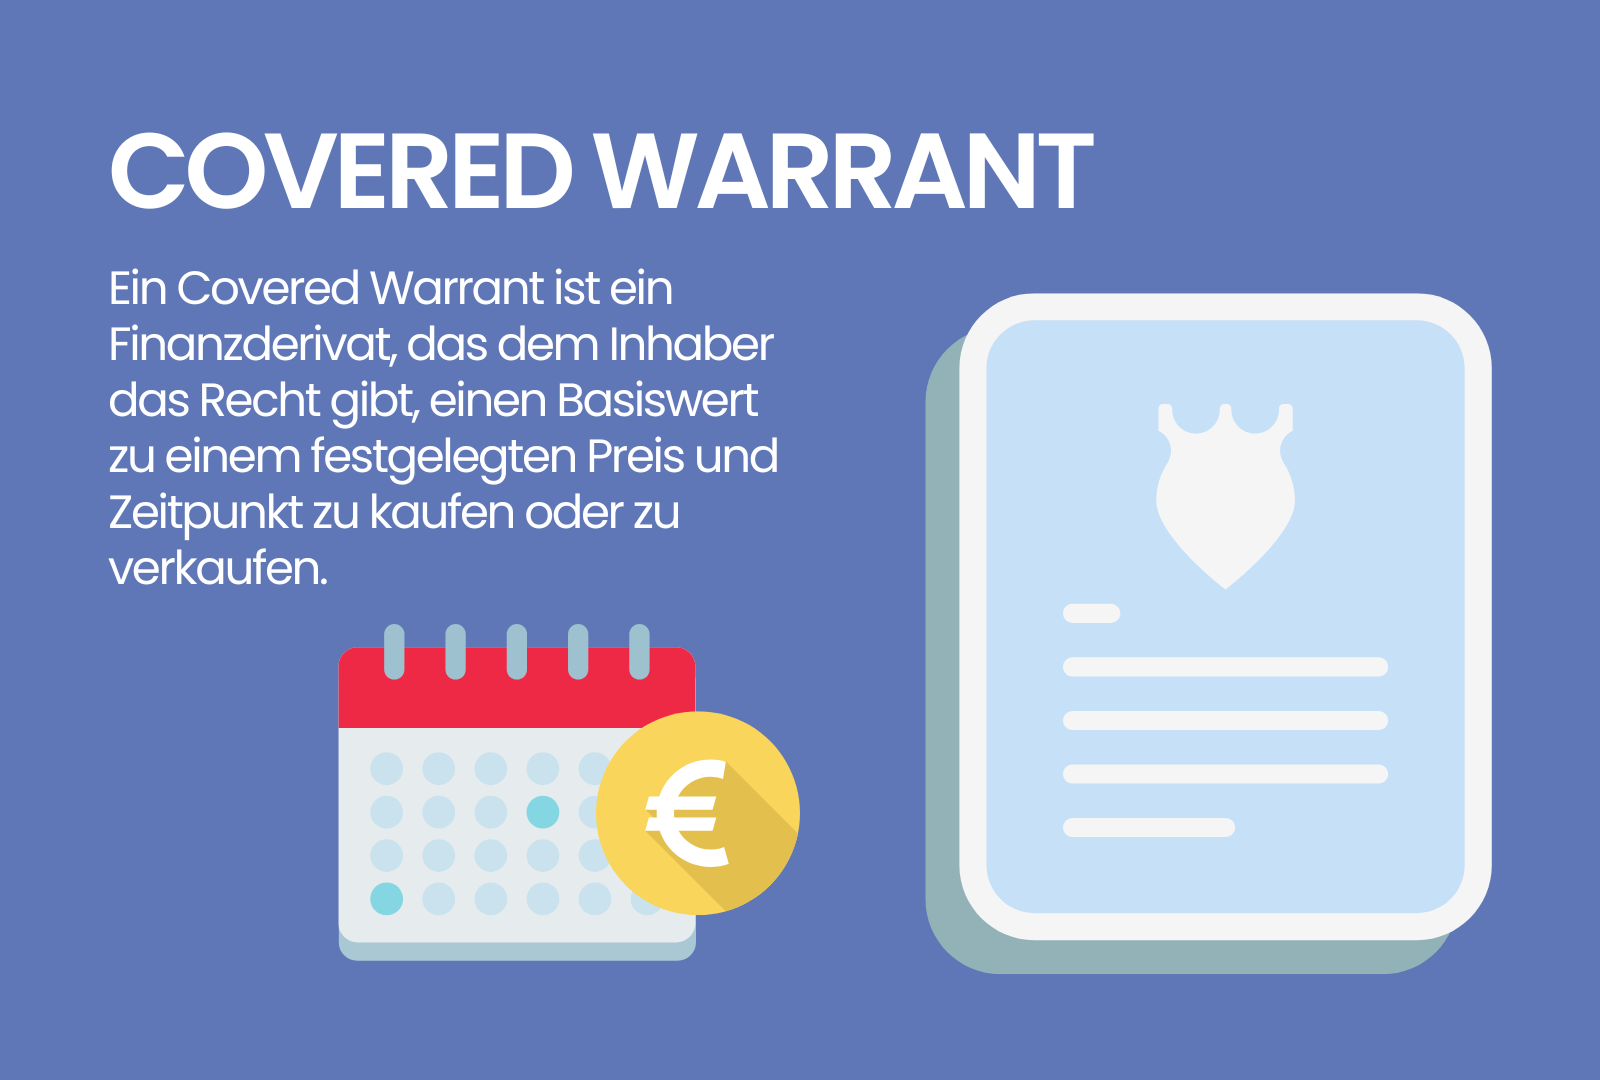 Covered Warrant